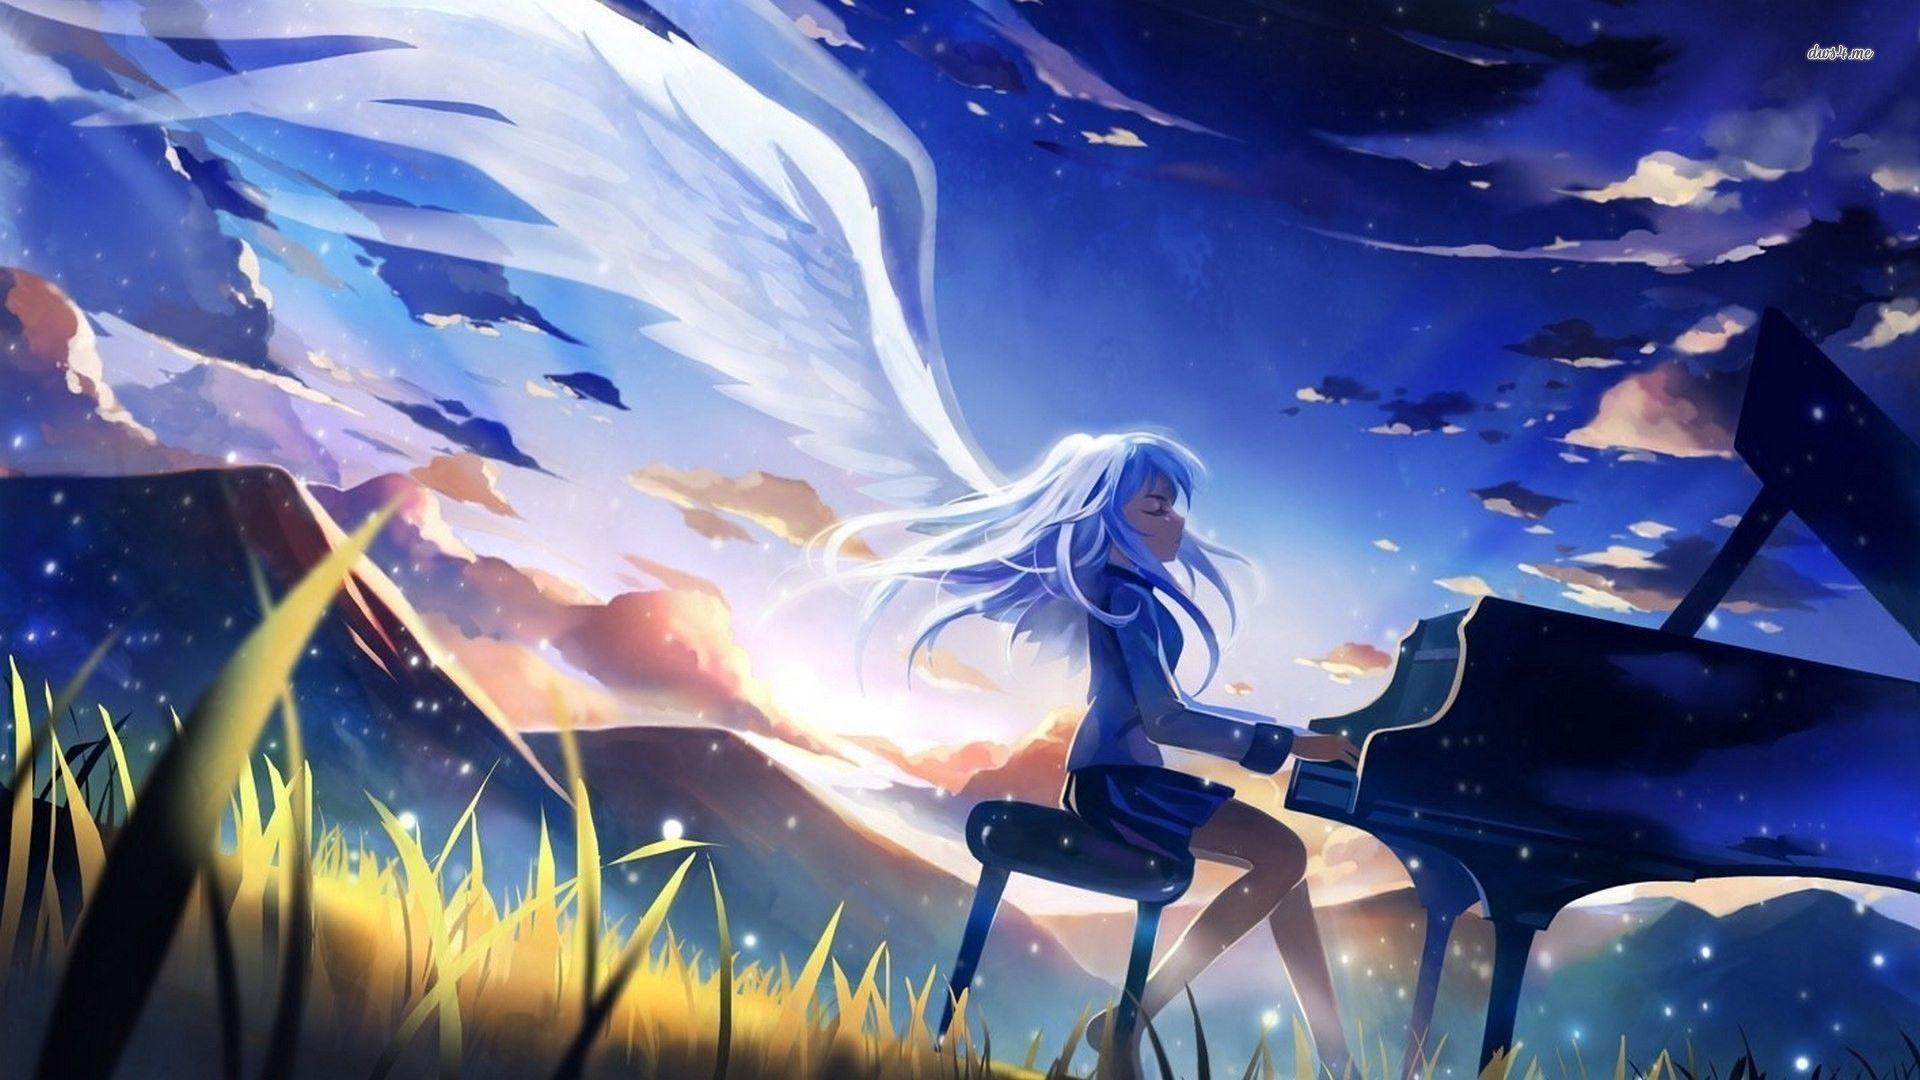 Fly with me - Other & Anime Background Wallpapers on Desktop Nexus (Image  2203831)